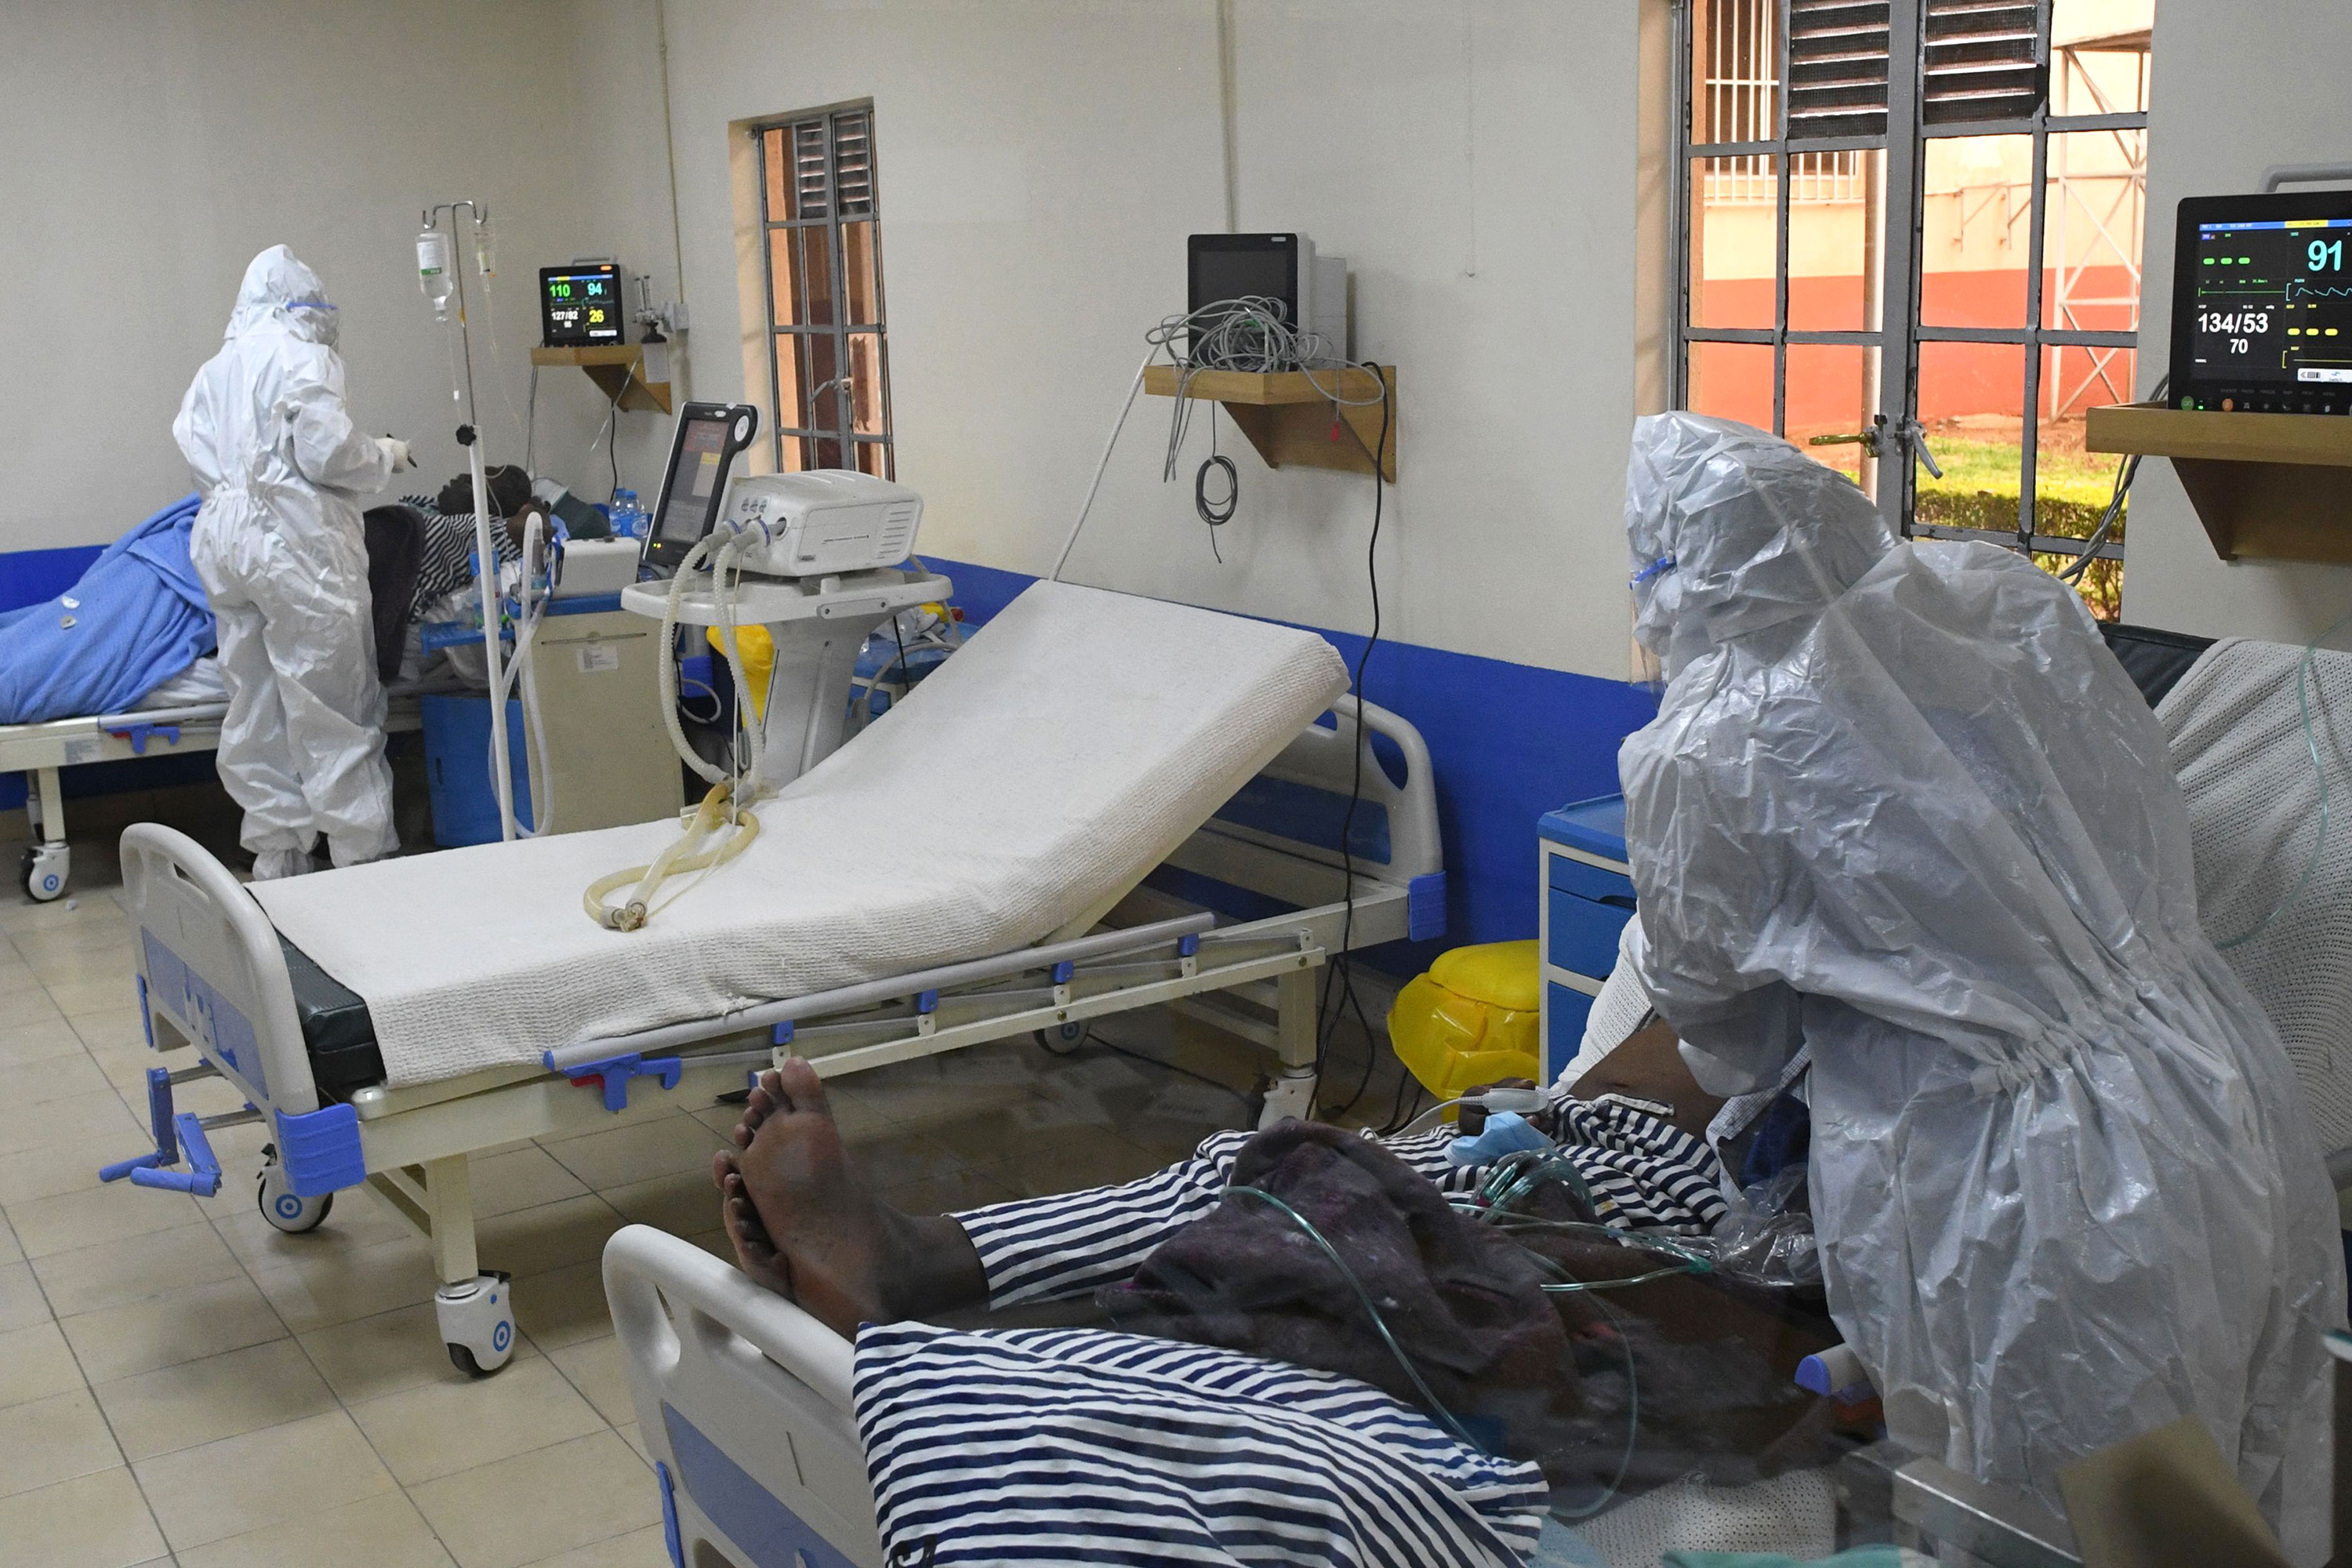 Members of the medical staff tend to coronavirus patients at the Intensive Care Unit of the Machakos County Level-5 hospital in Machakos, Kenya, on July 28.